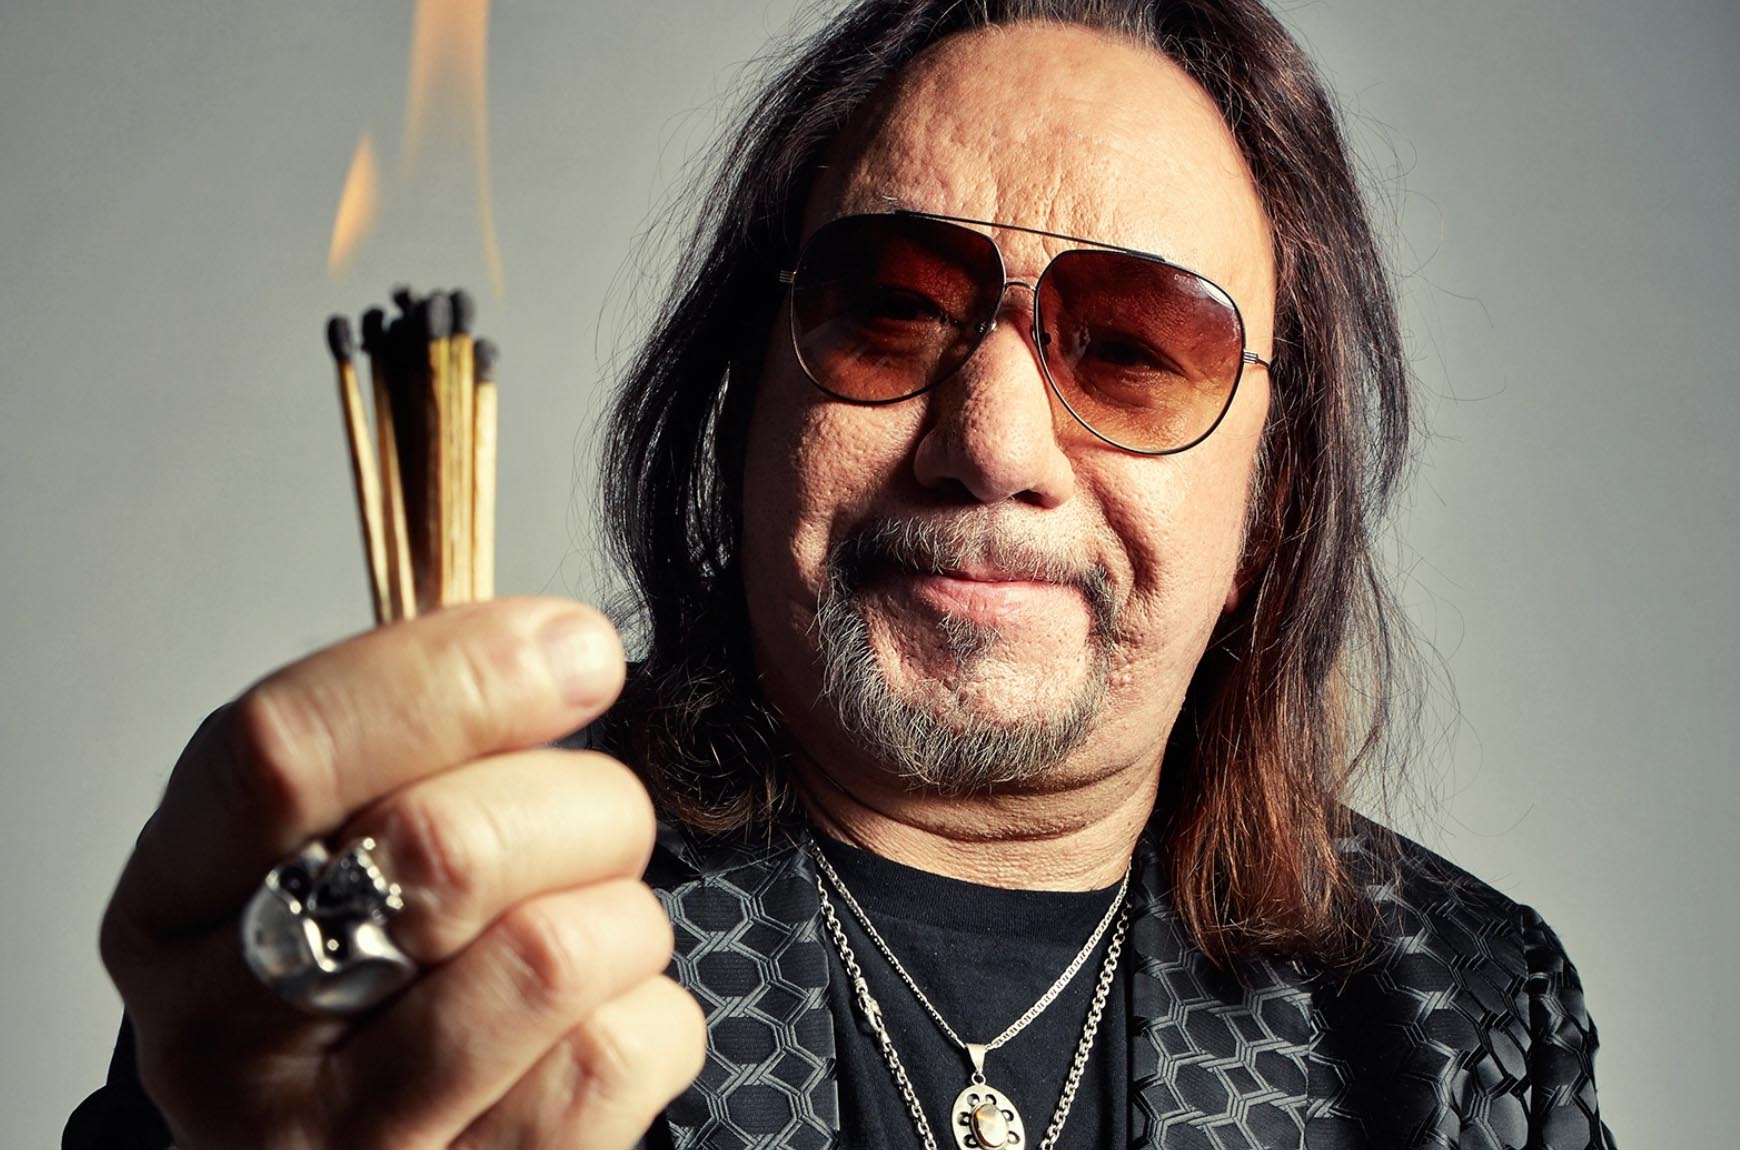 <p>What is it with guitarists and Trump? <a href="https://www.rollingstone.com/music/music-news/former-kiss-guitarist-ace-frehley-i-am-trump-supporter-1057797/"><b>In an interview with the <i>Cassius Morris Show</i></b></a> f<span>ormer Kiss guitarist Ace Frehley laid out his support for the former president, saying:</span></p><blockquote>I don’t think politics and rock & roll mix — in my opinion. And I try to stay away from that as much as I can. I mean, once in a while, I’ll make a crack. I will say I’m a Trump supporter. All the politicians have had skeletons in the closet. But I think Trump is the strongest leader that we’ve got on the table.</blockquote>